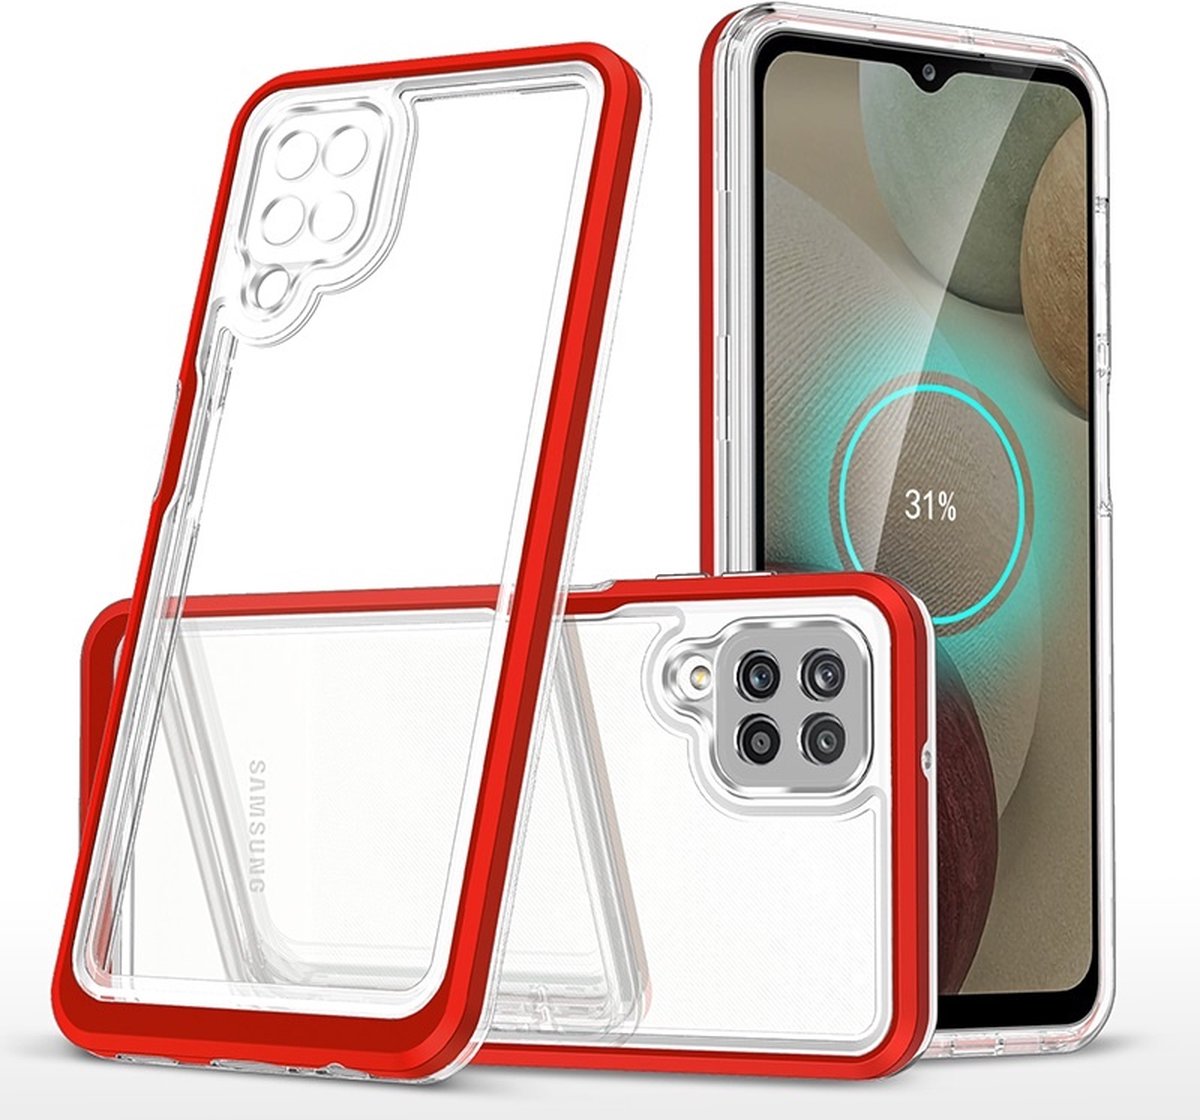 Samsung Galaxy A12 5G hoesje backcover Transparant met bumper case – Rood – oTronica